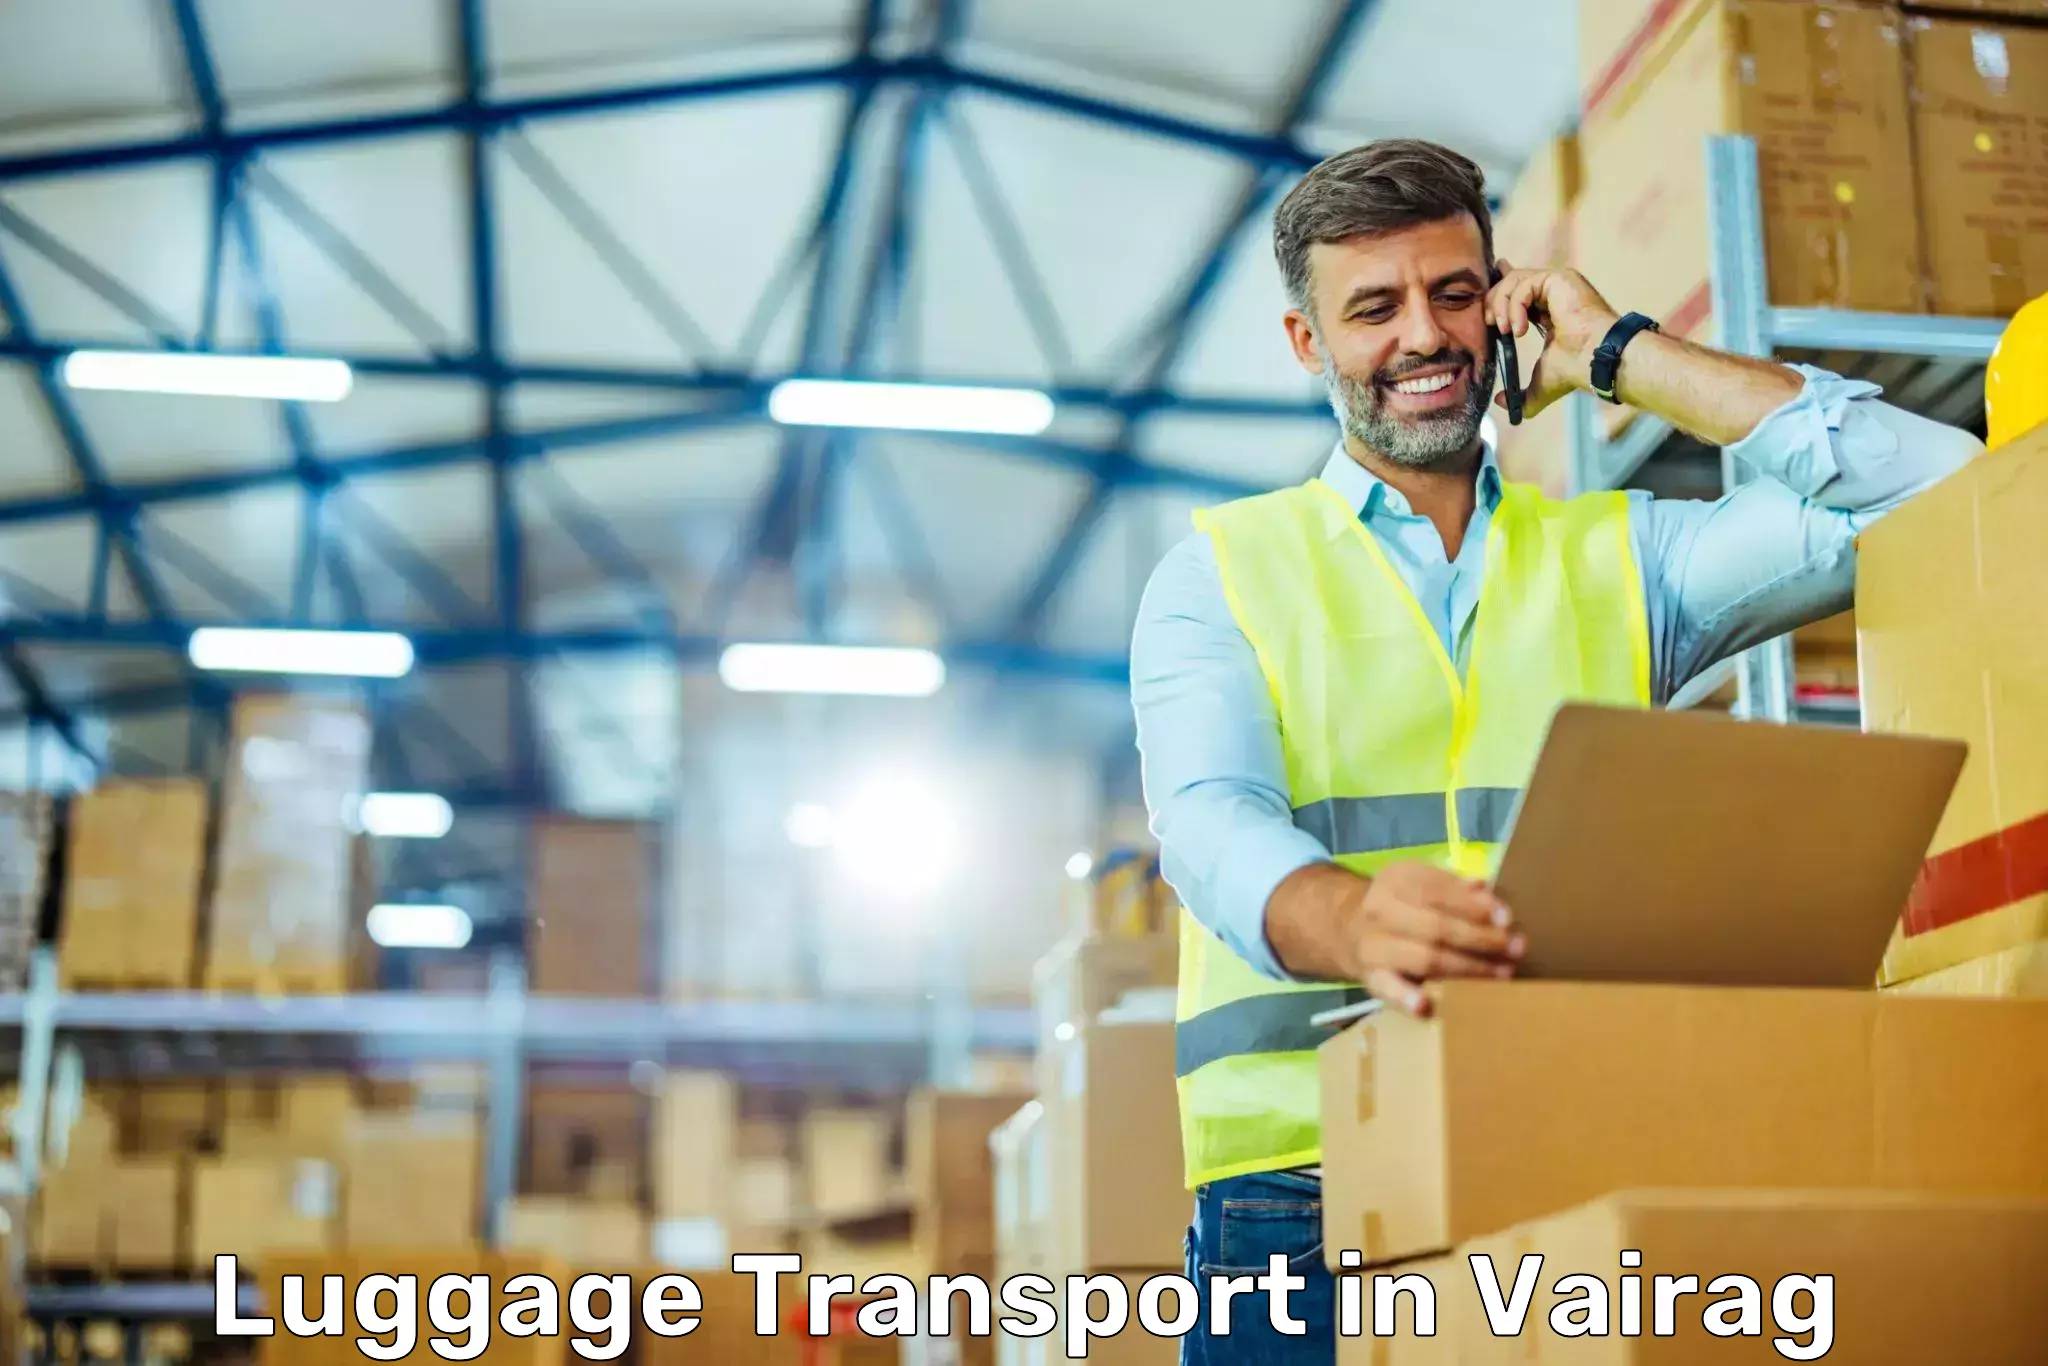 Baggage delivery scheduling in Vairag